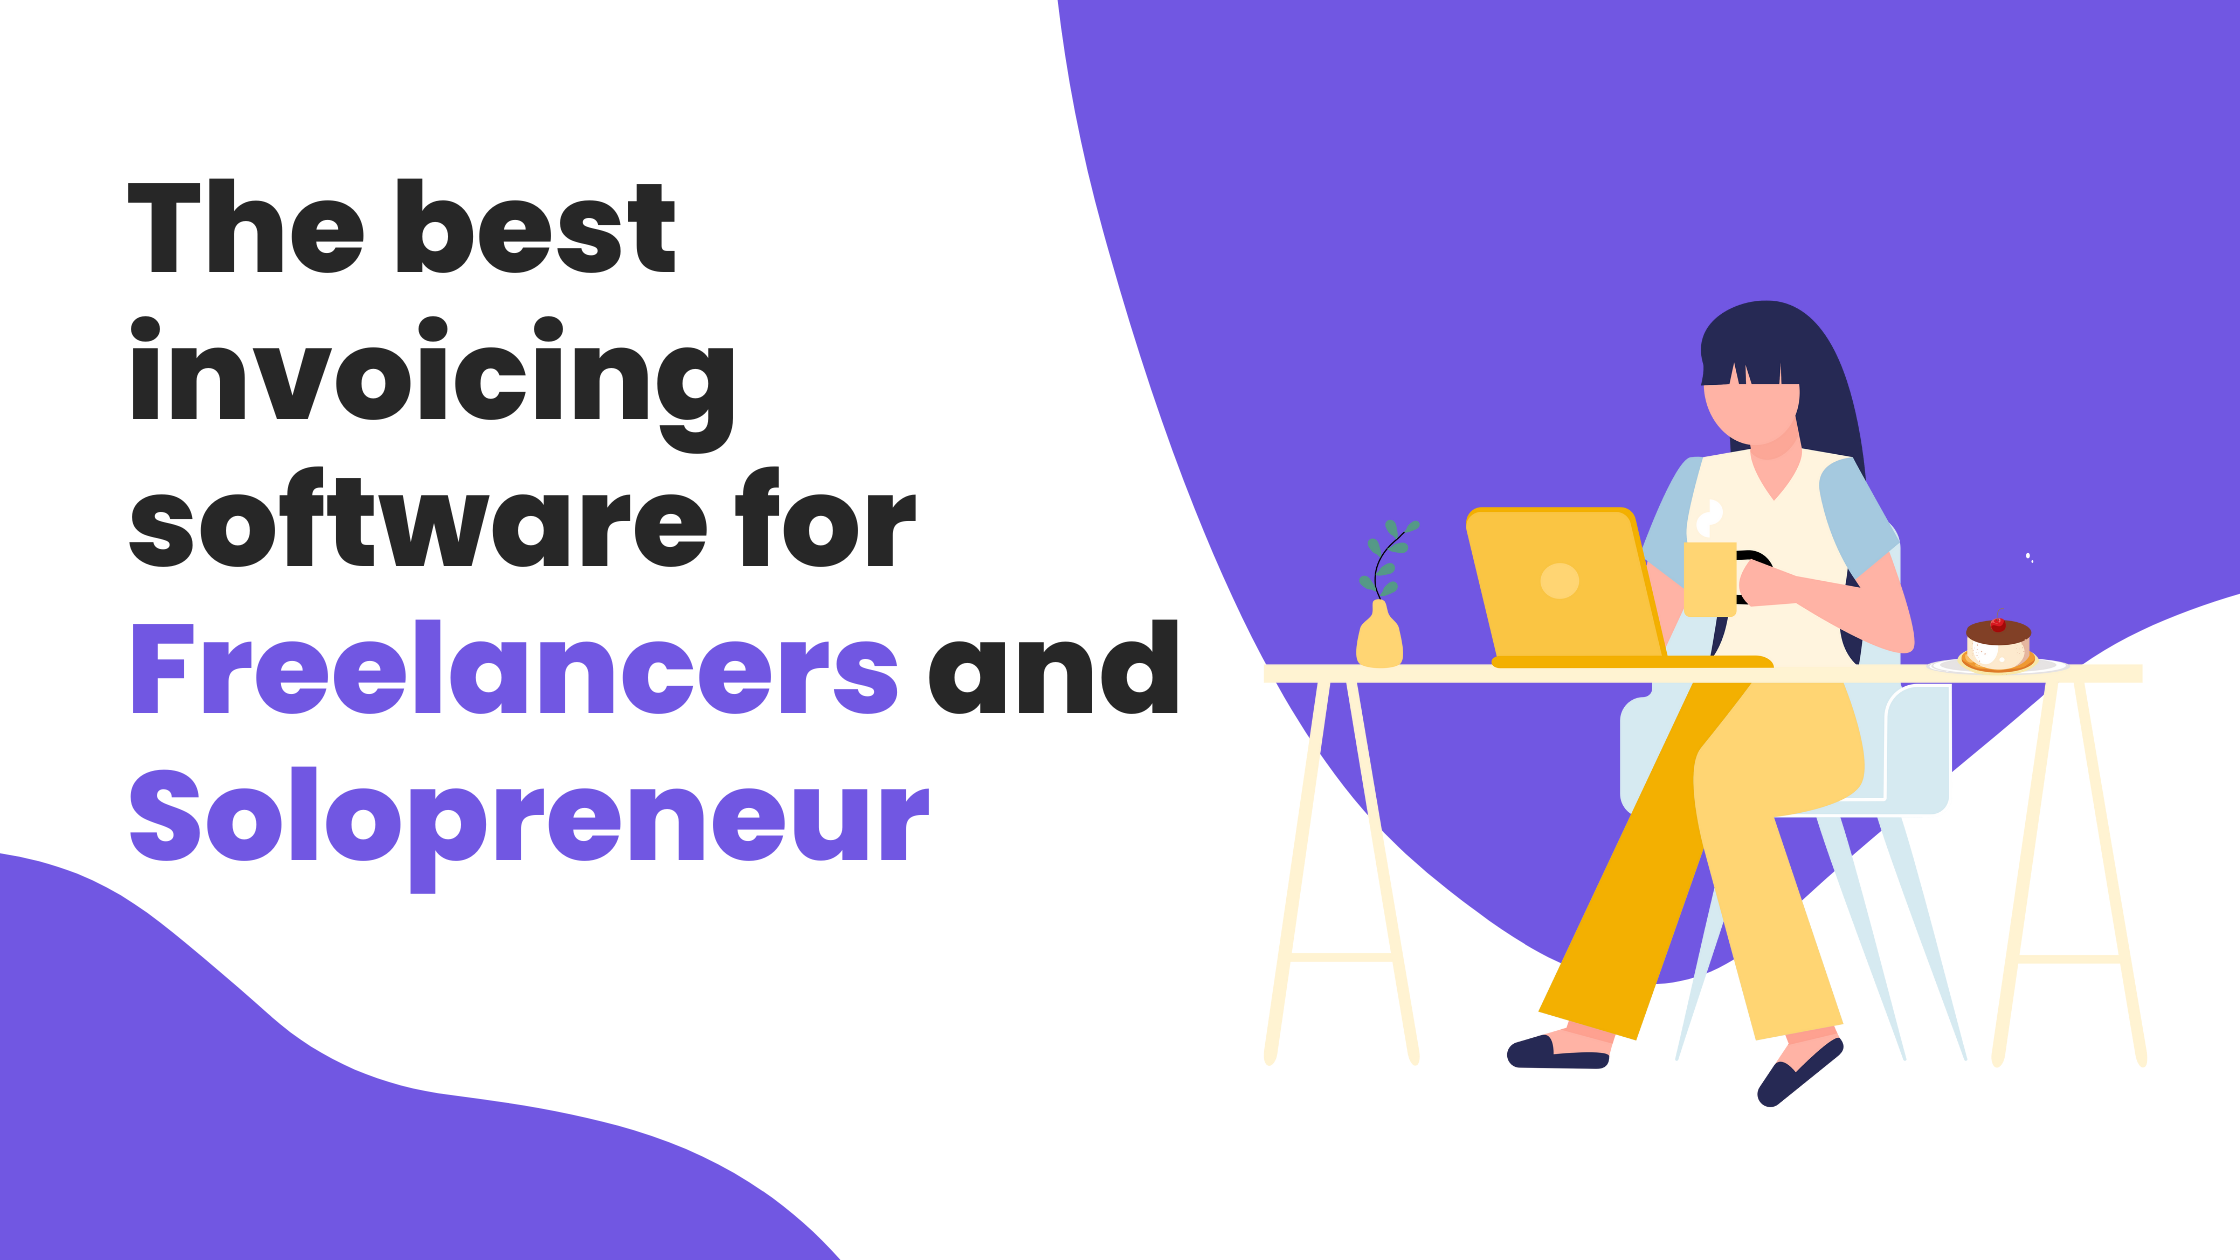 The best invoicing software for freelancers and Solopreneur